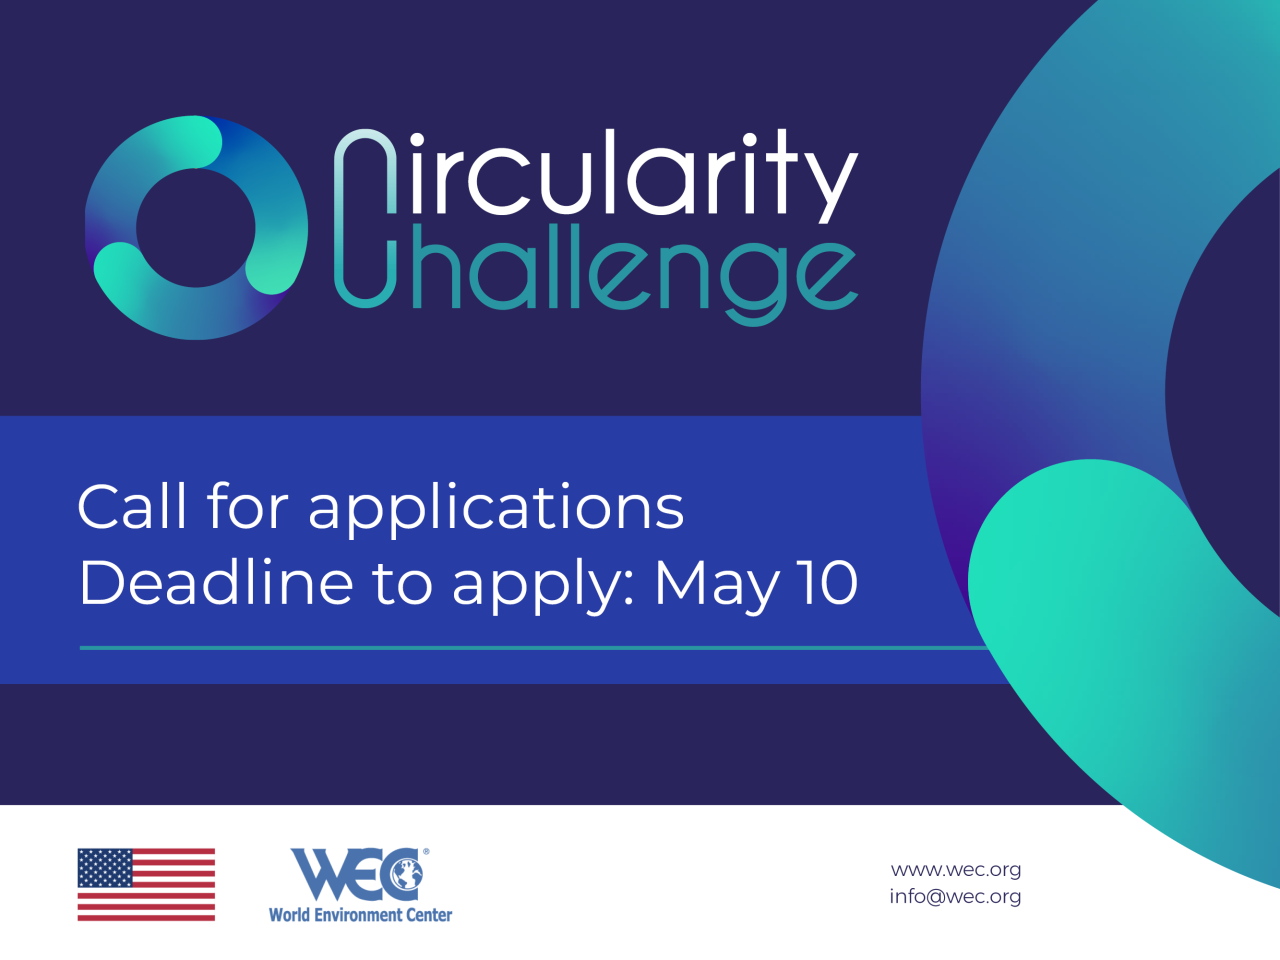 Image with a circular design/logo and text reading Circularity Challenge. Call for Applications. Deadline to apply: May 10